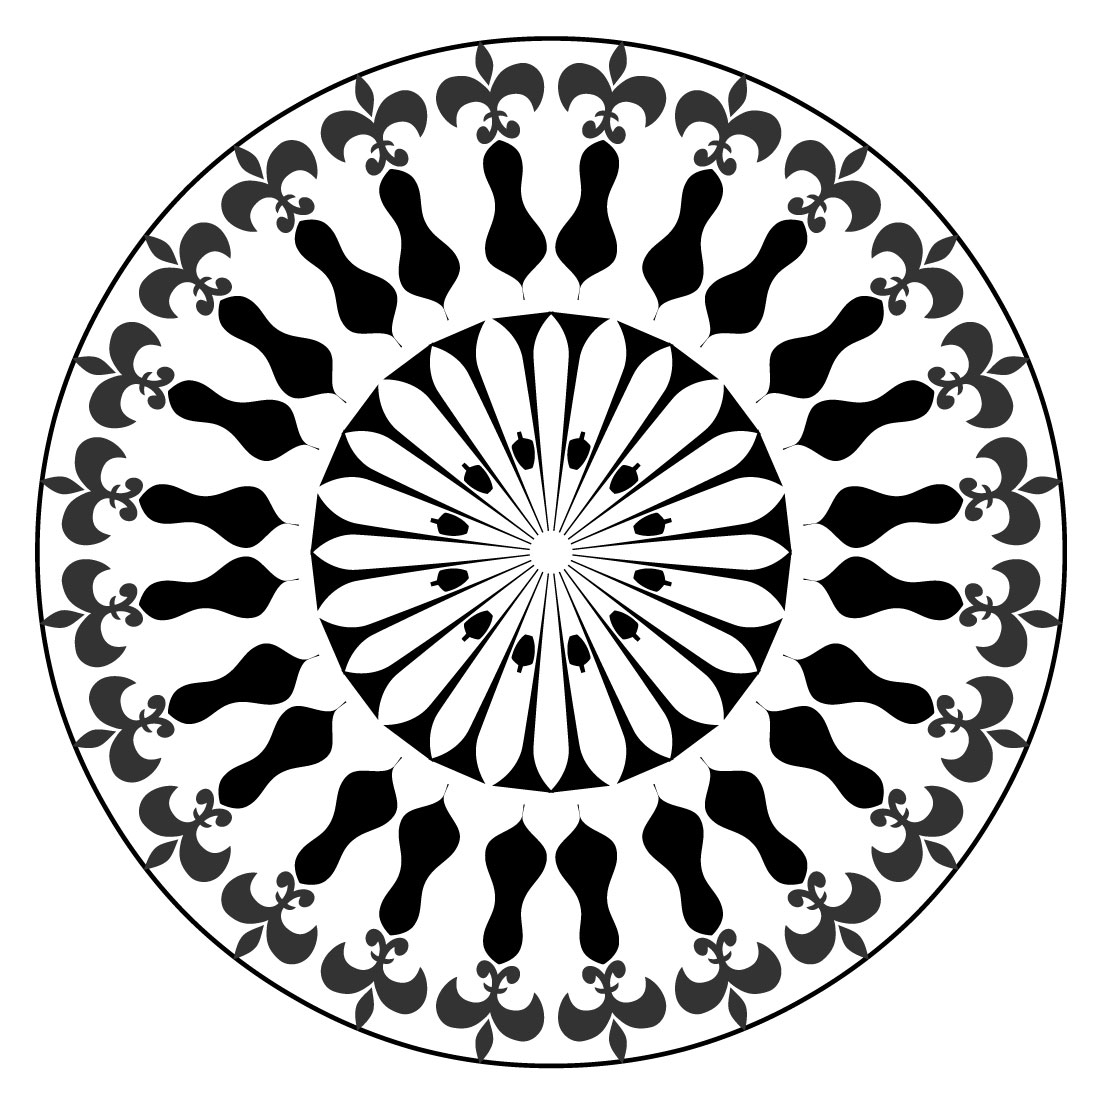 Mandala-Art-with-black-and-white-shades preview image.